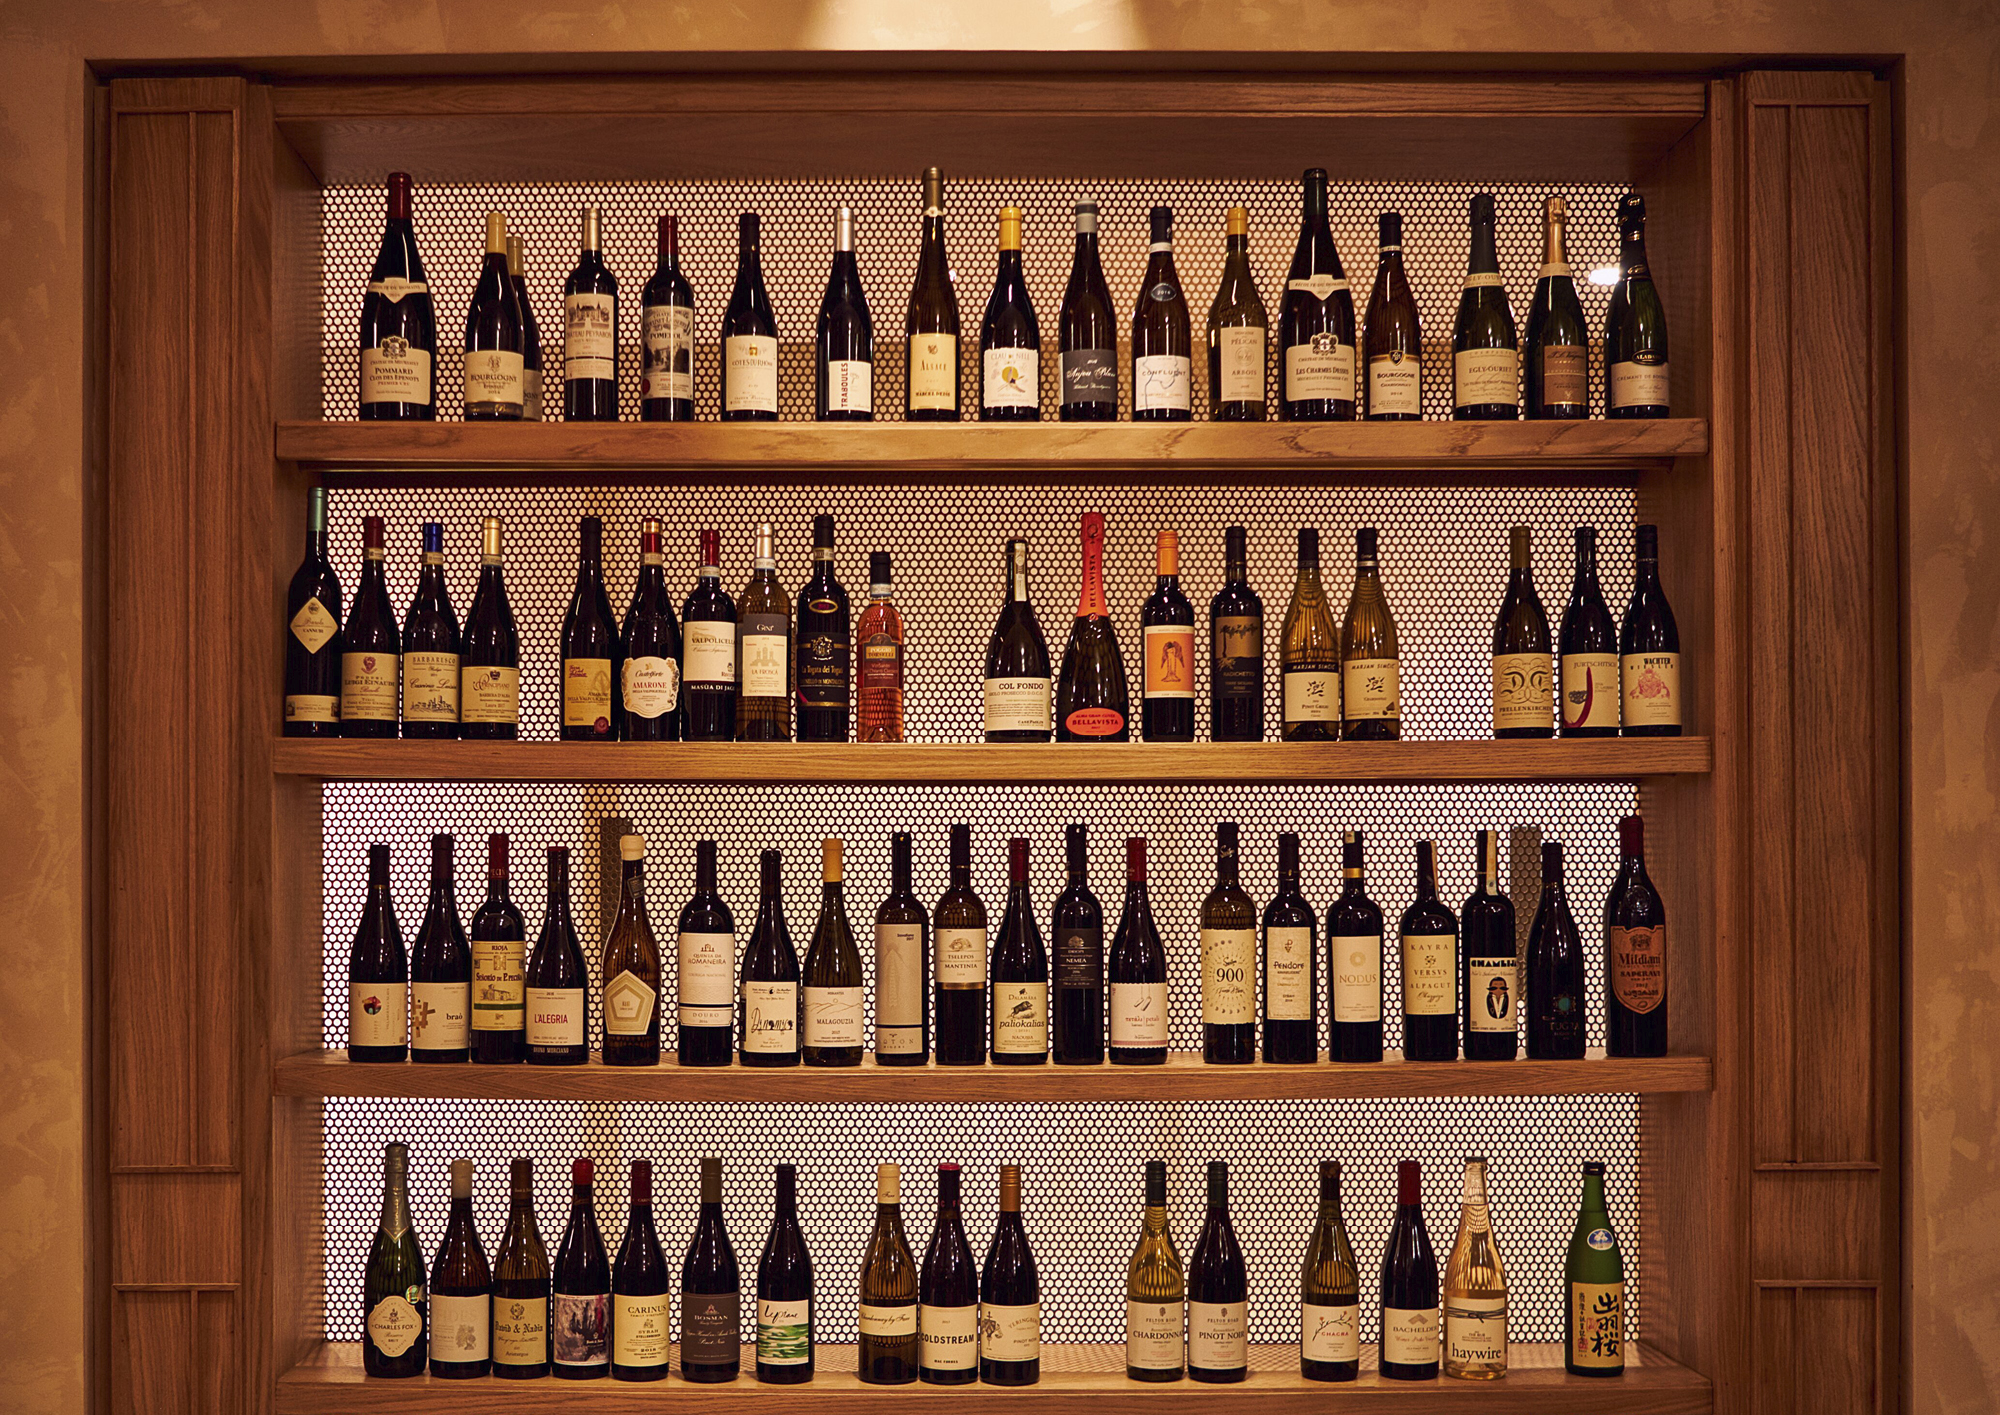 The wall of wine at Trivet, which has one of the most impressive lists in London